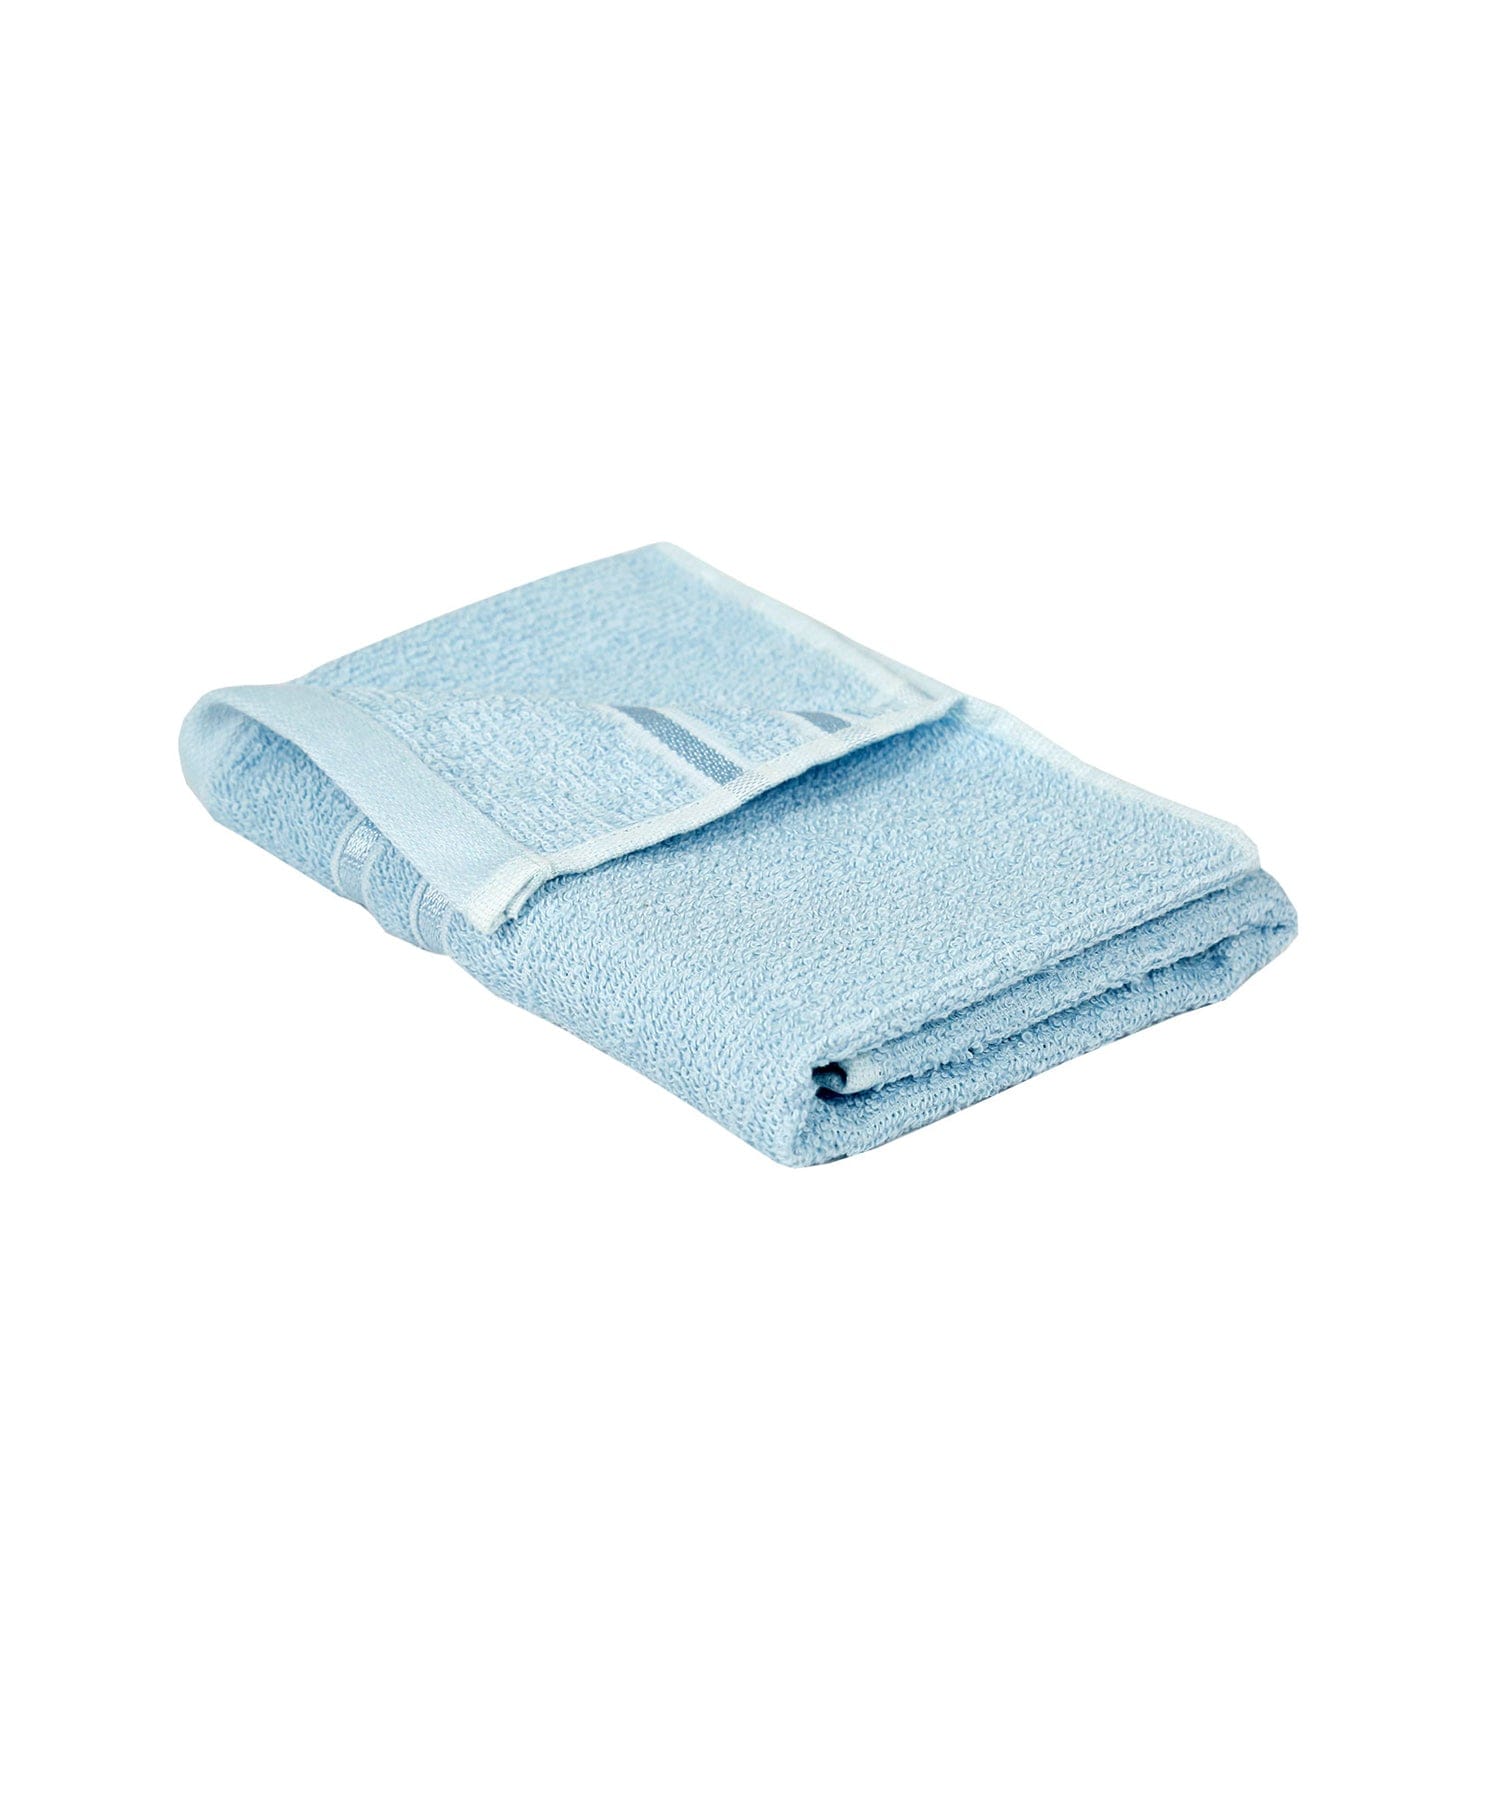 COMFORT LIVING TOWELS,100% Cotton,Quicky Dry,Light Weight, COOL BLUE